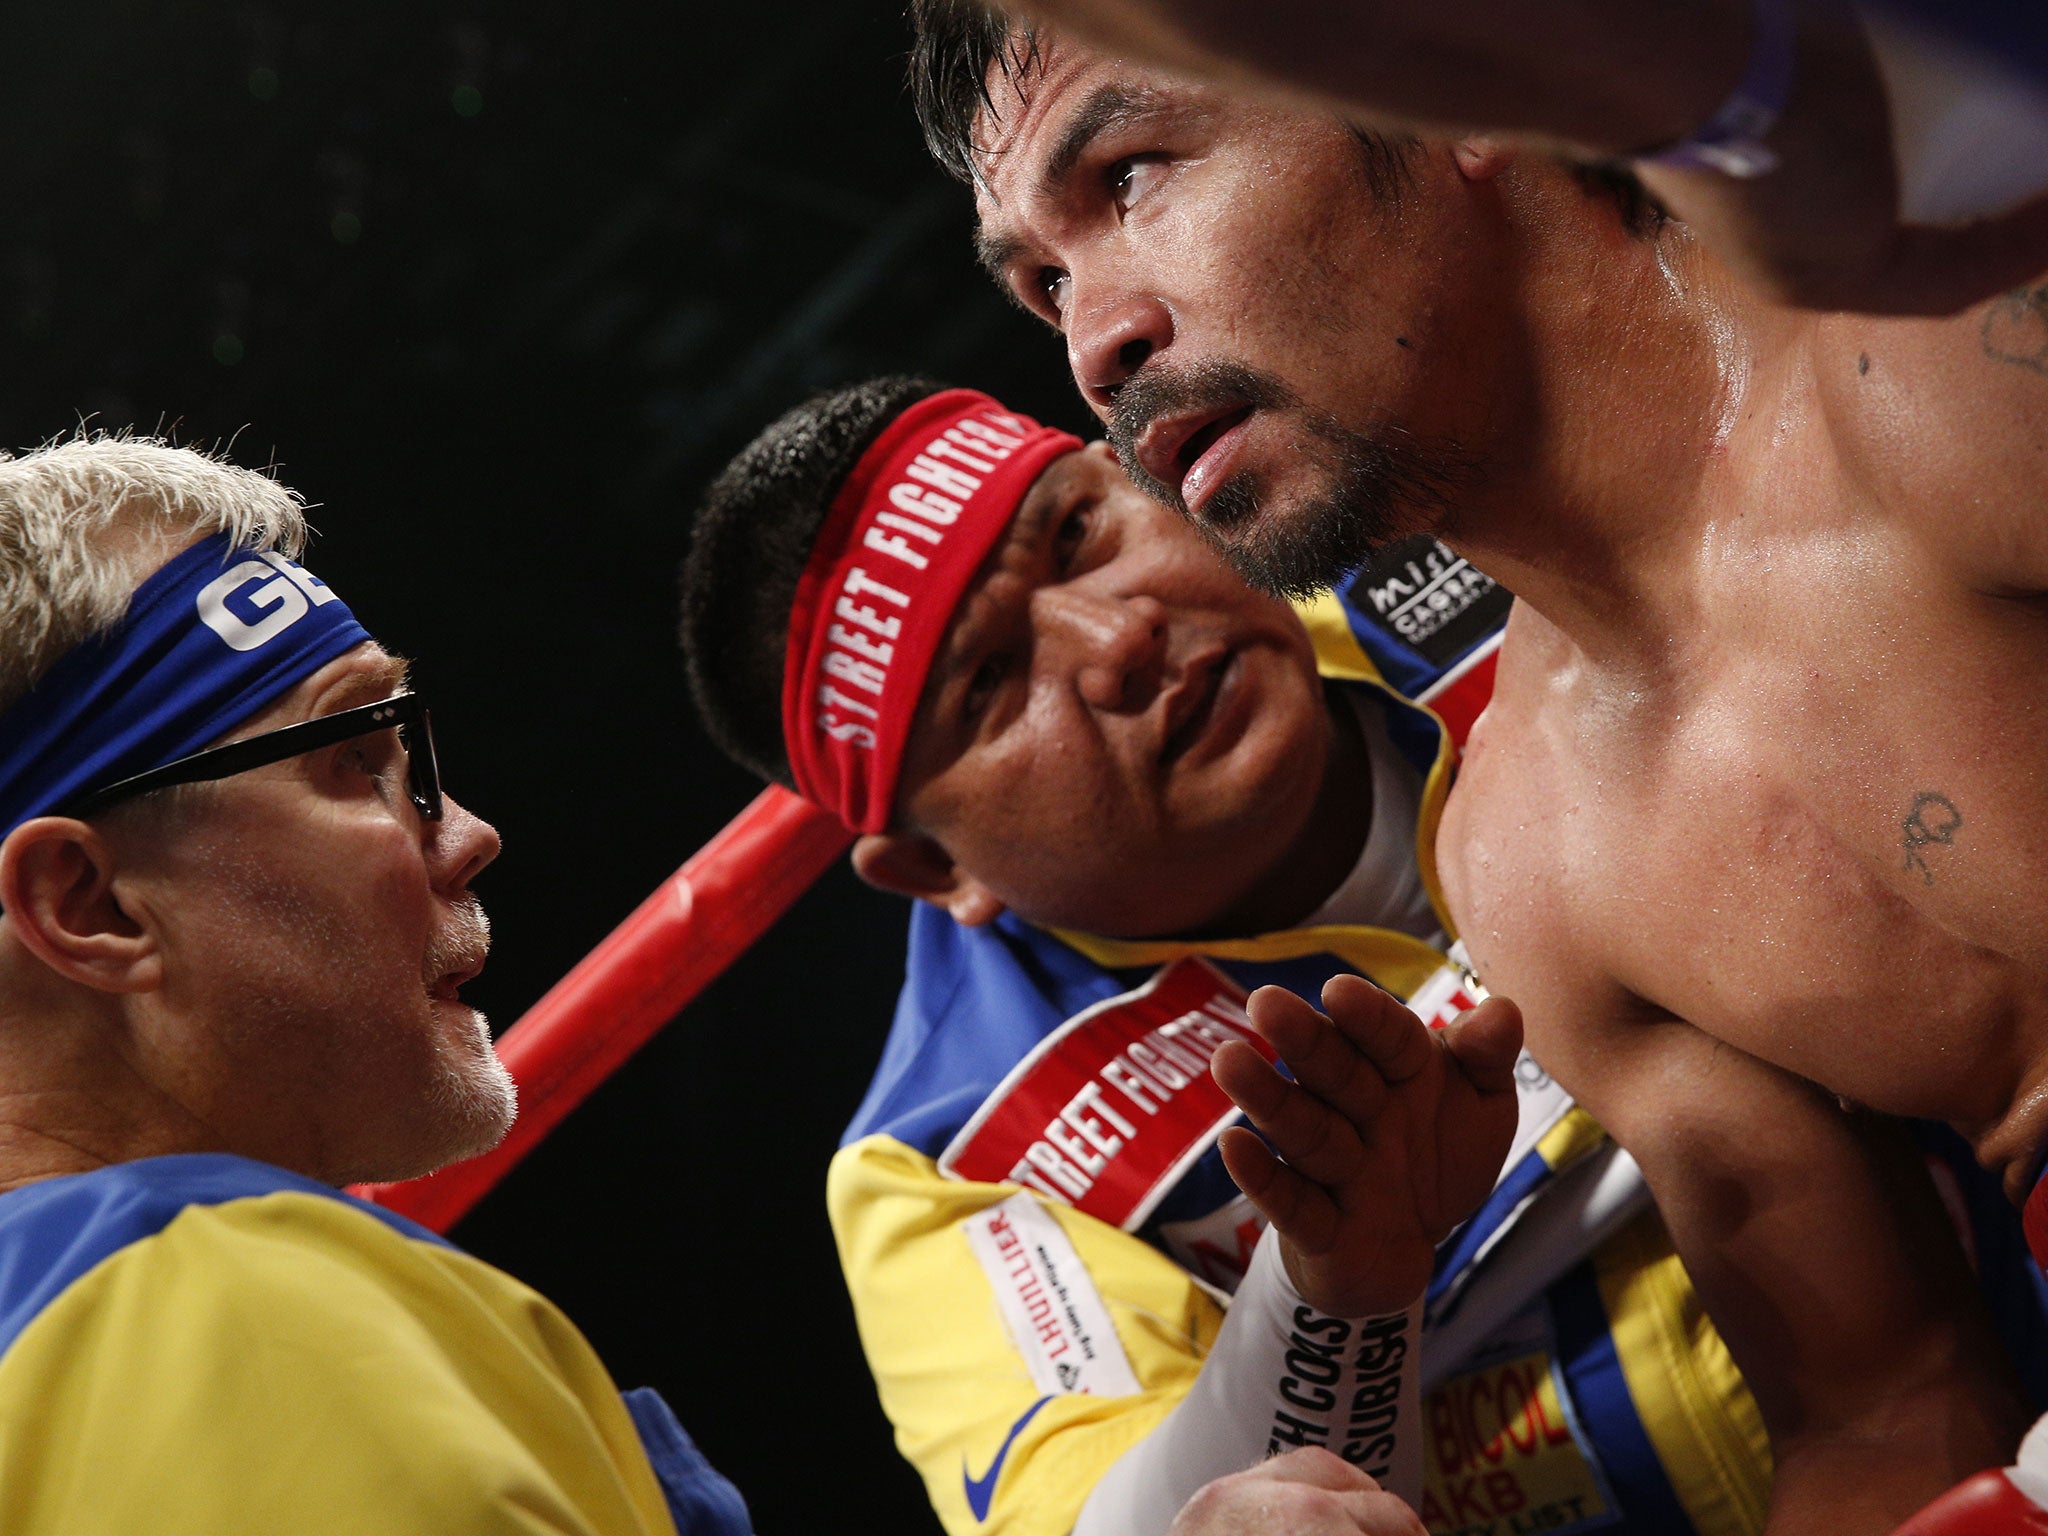 Freddie Roach talks to Manny Pacquiao during his defeat to Floyd Mayweather